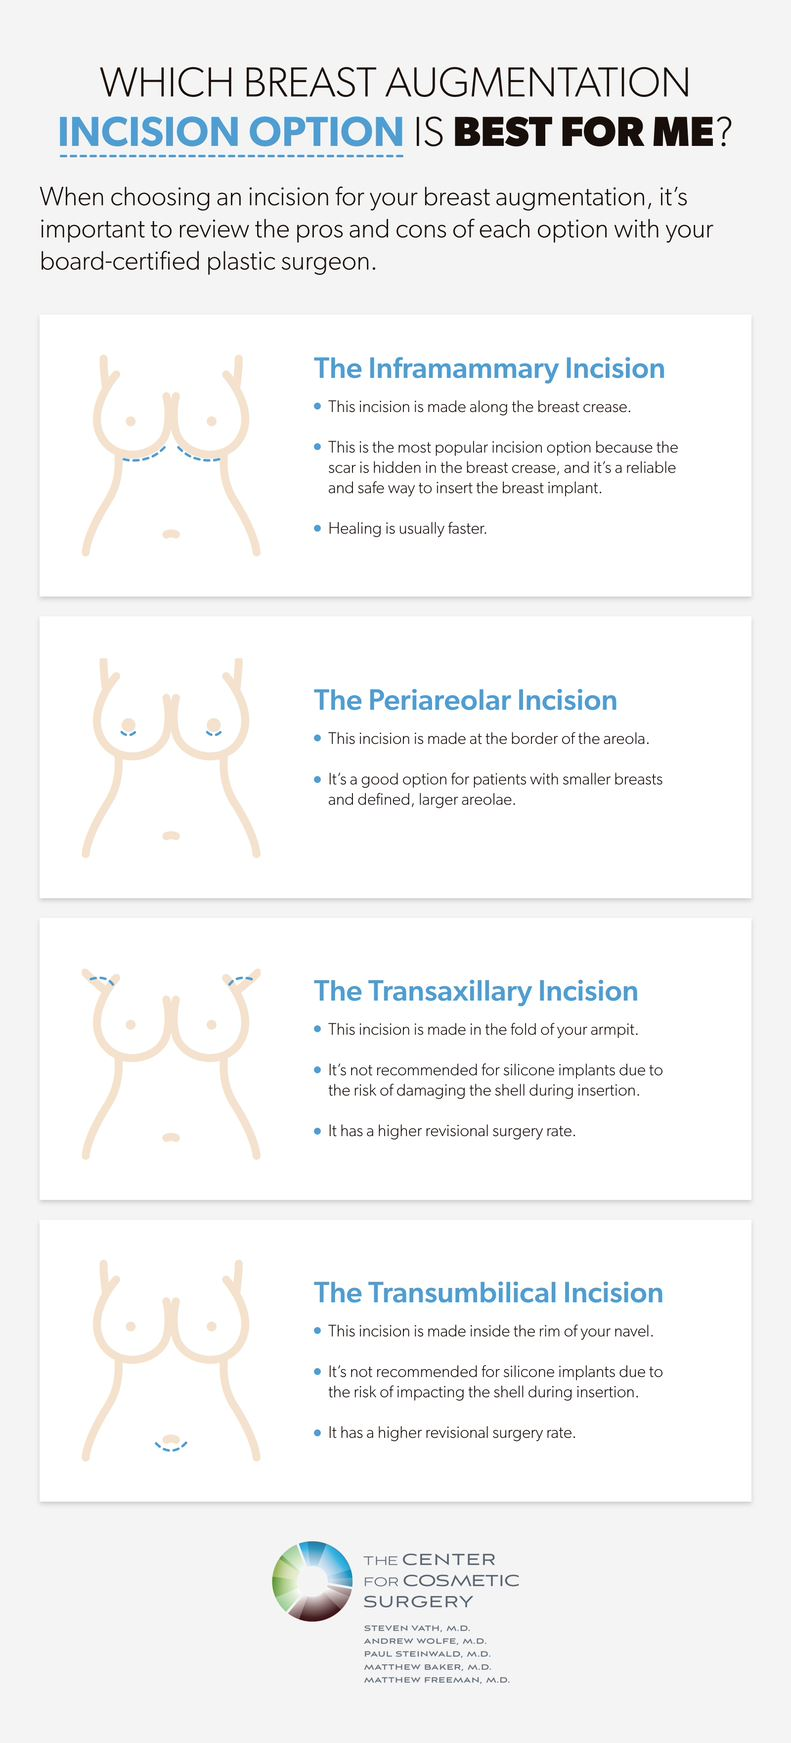 Infographic showing the pros and cons of inframammary, periareolar, transaxillary, and transumbilical incisions.